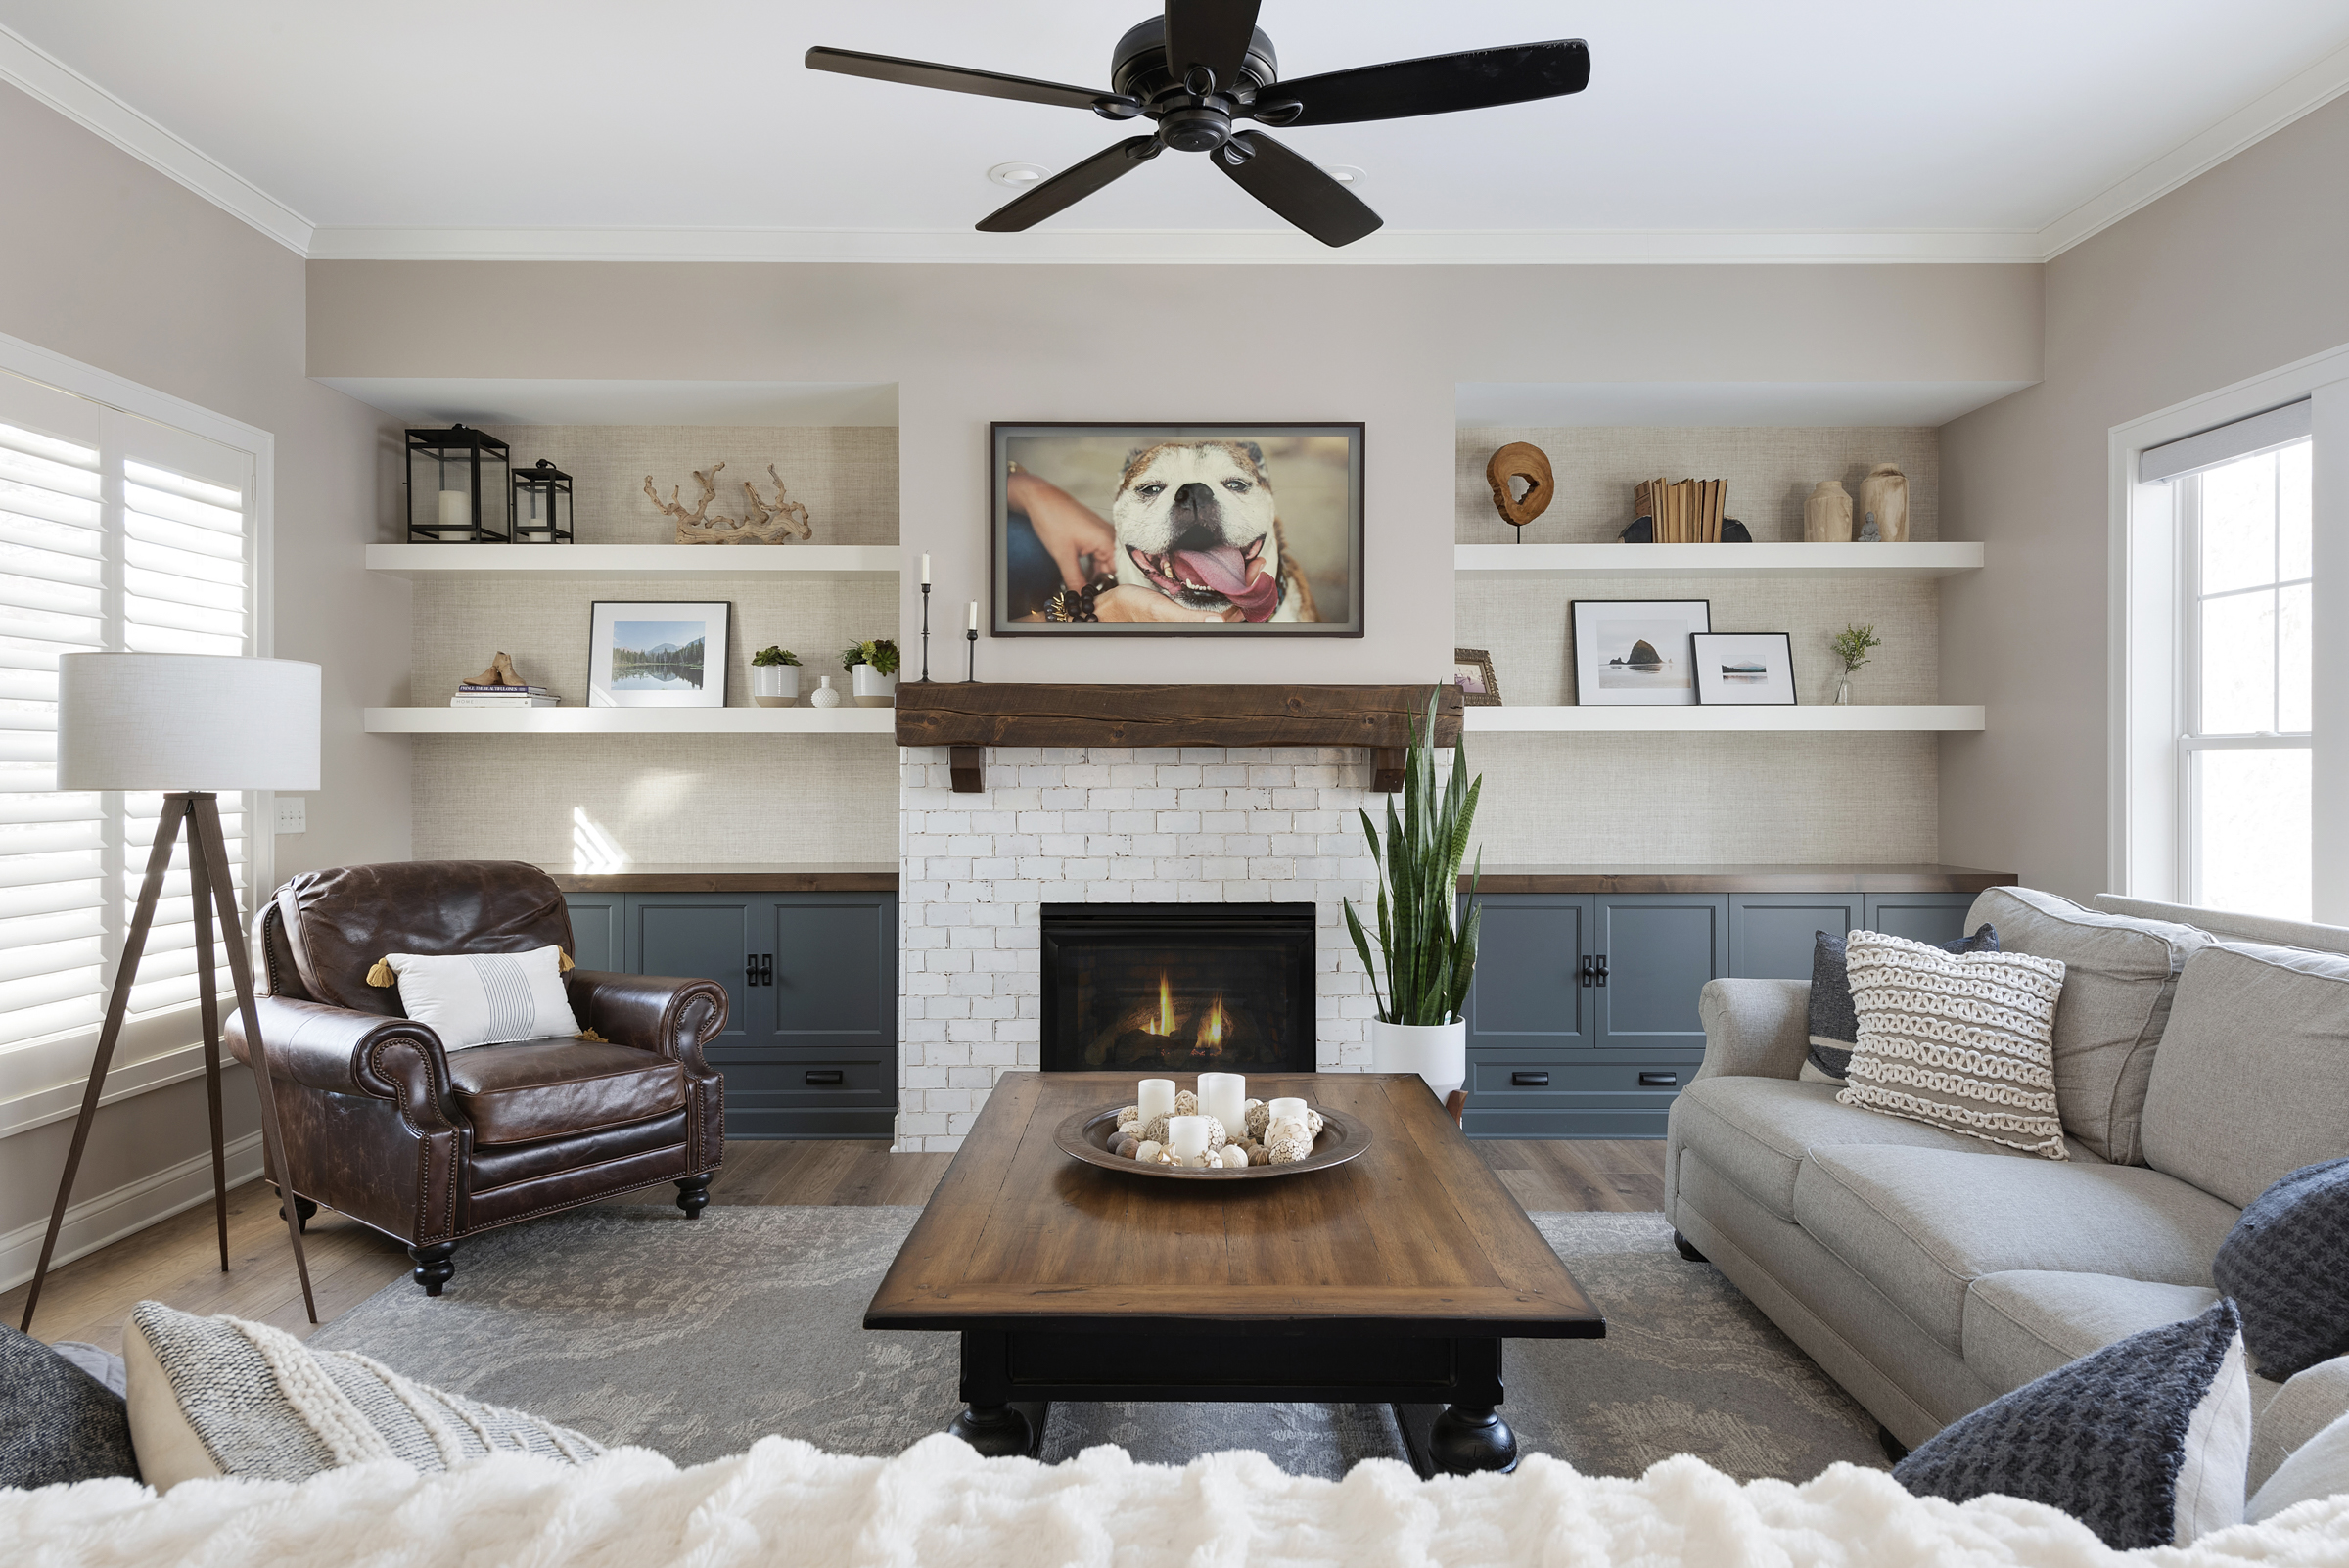 Living room with multiple open shelves, fireplace, ceiling fan, and picture of a dog.